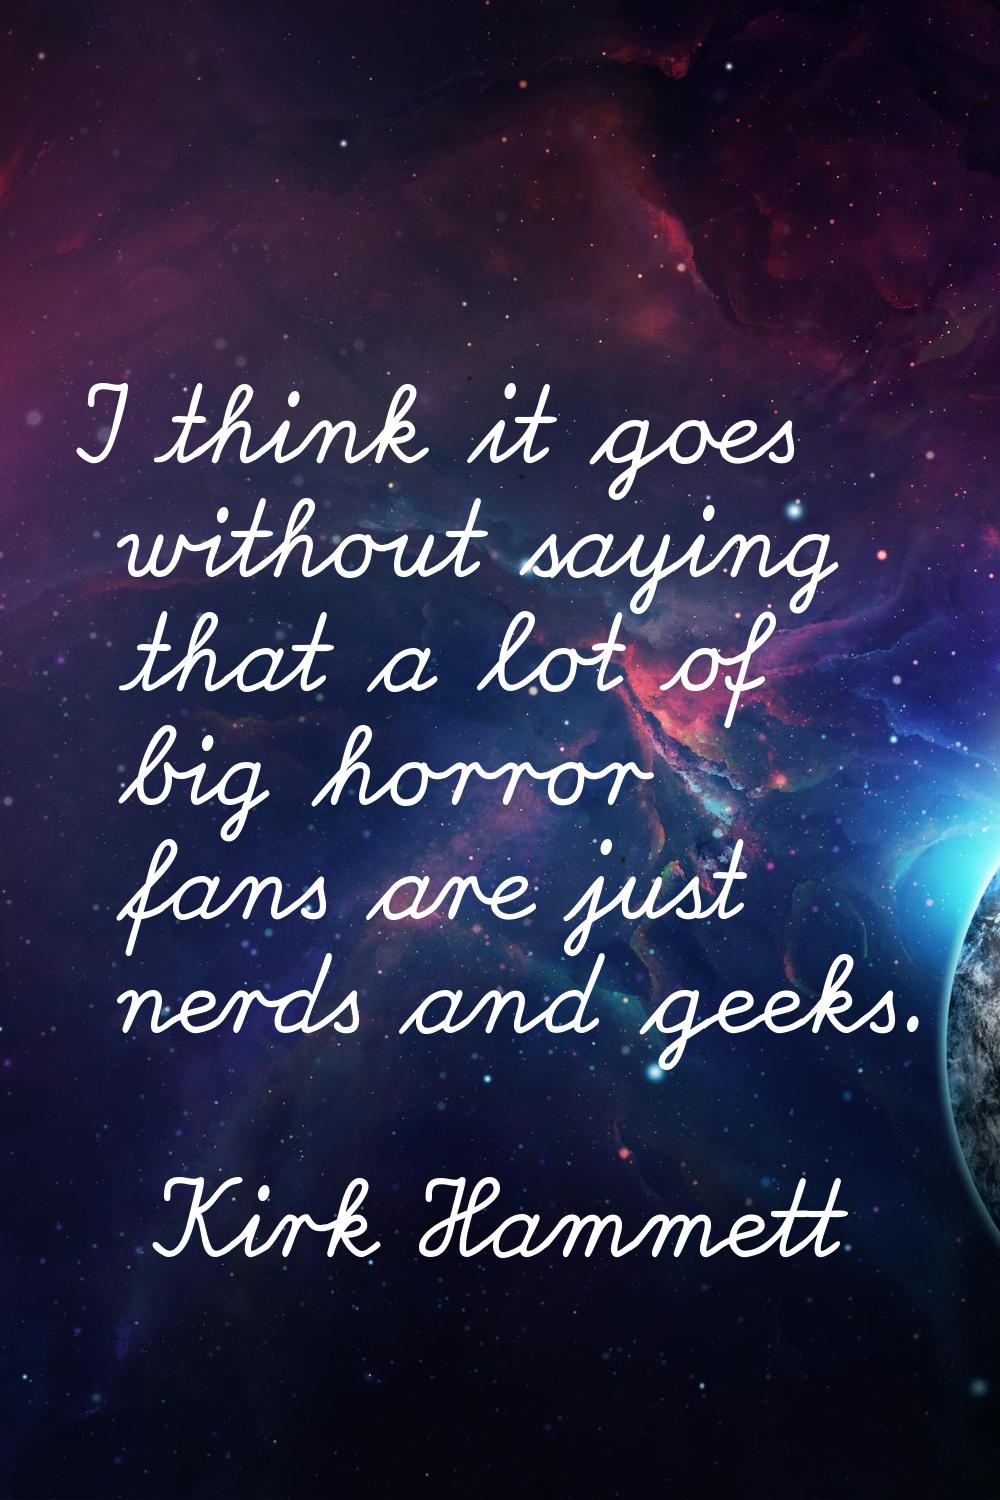 I think it goes without saying that a lot of big horror fans are just nerds and geeks.